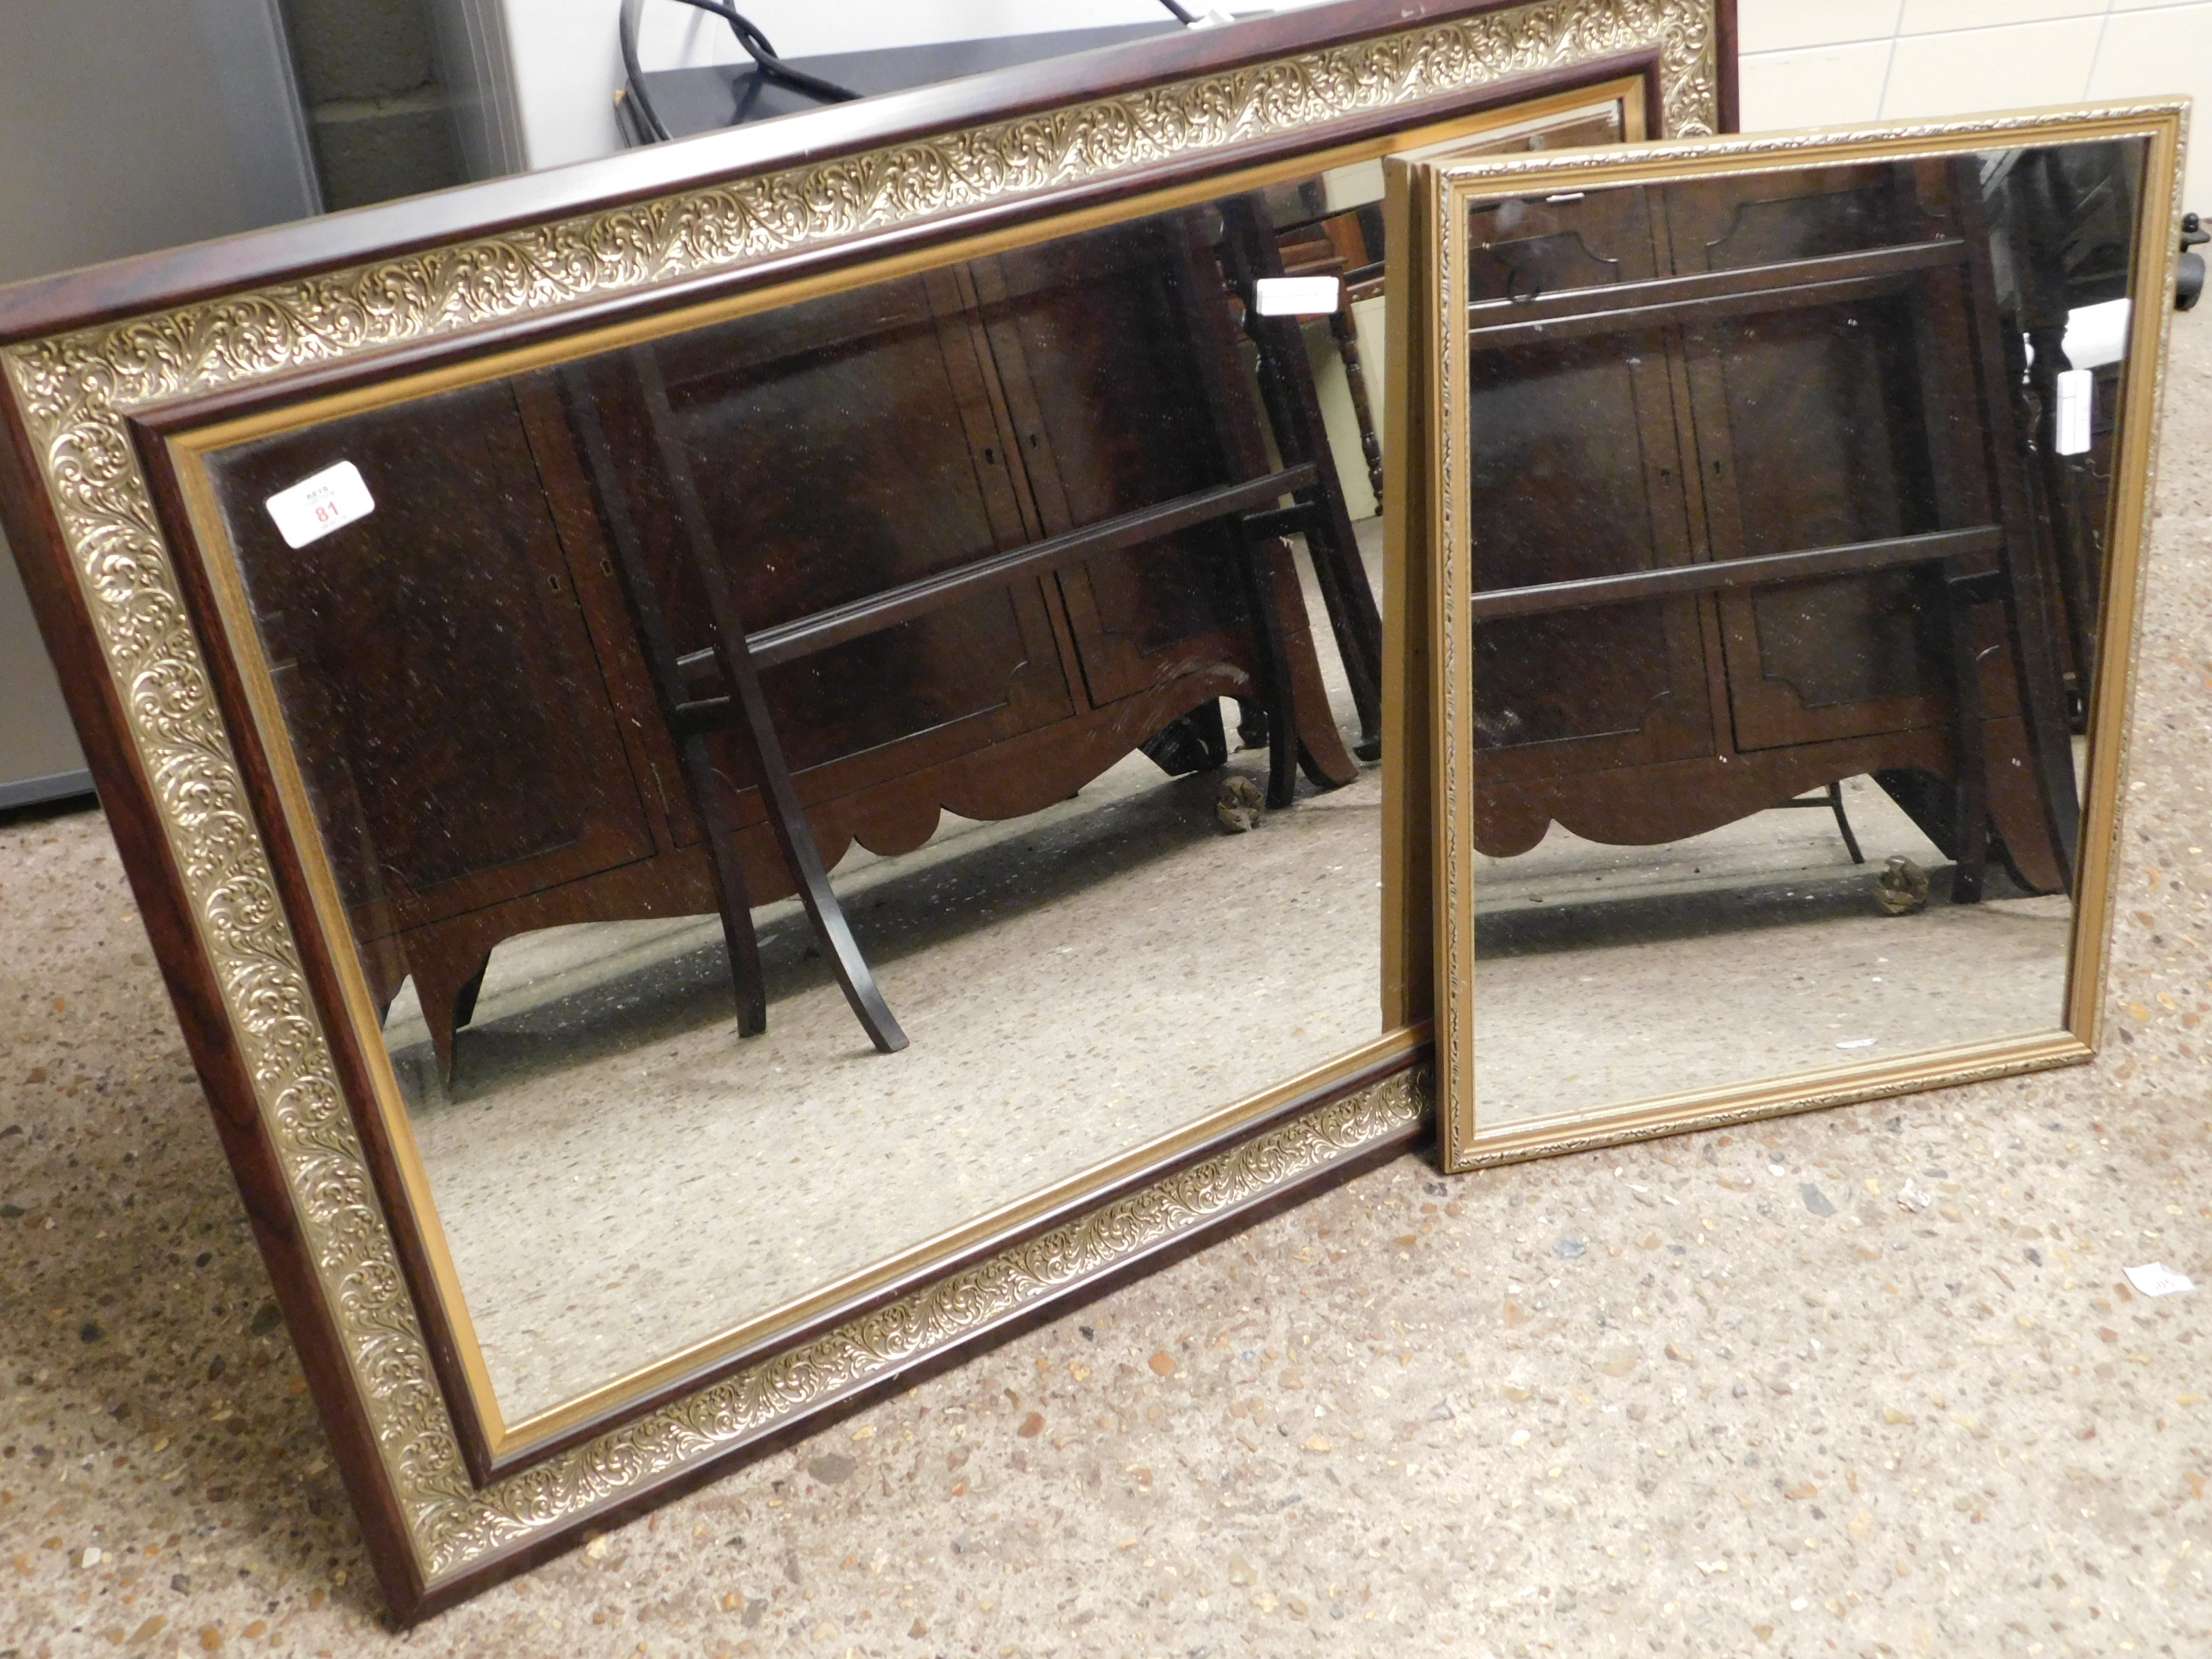 MODERN GILT FRAMED WALL MIRROR TOGETHER WITH A MAHOGANY AND GILT FRAMED EFFECT MIRROR (2)